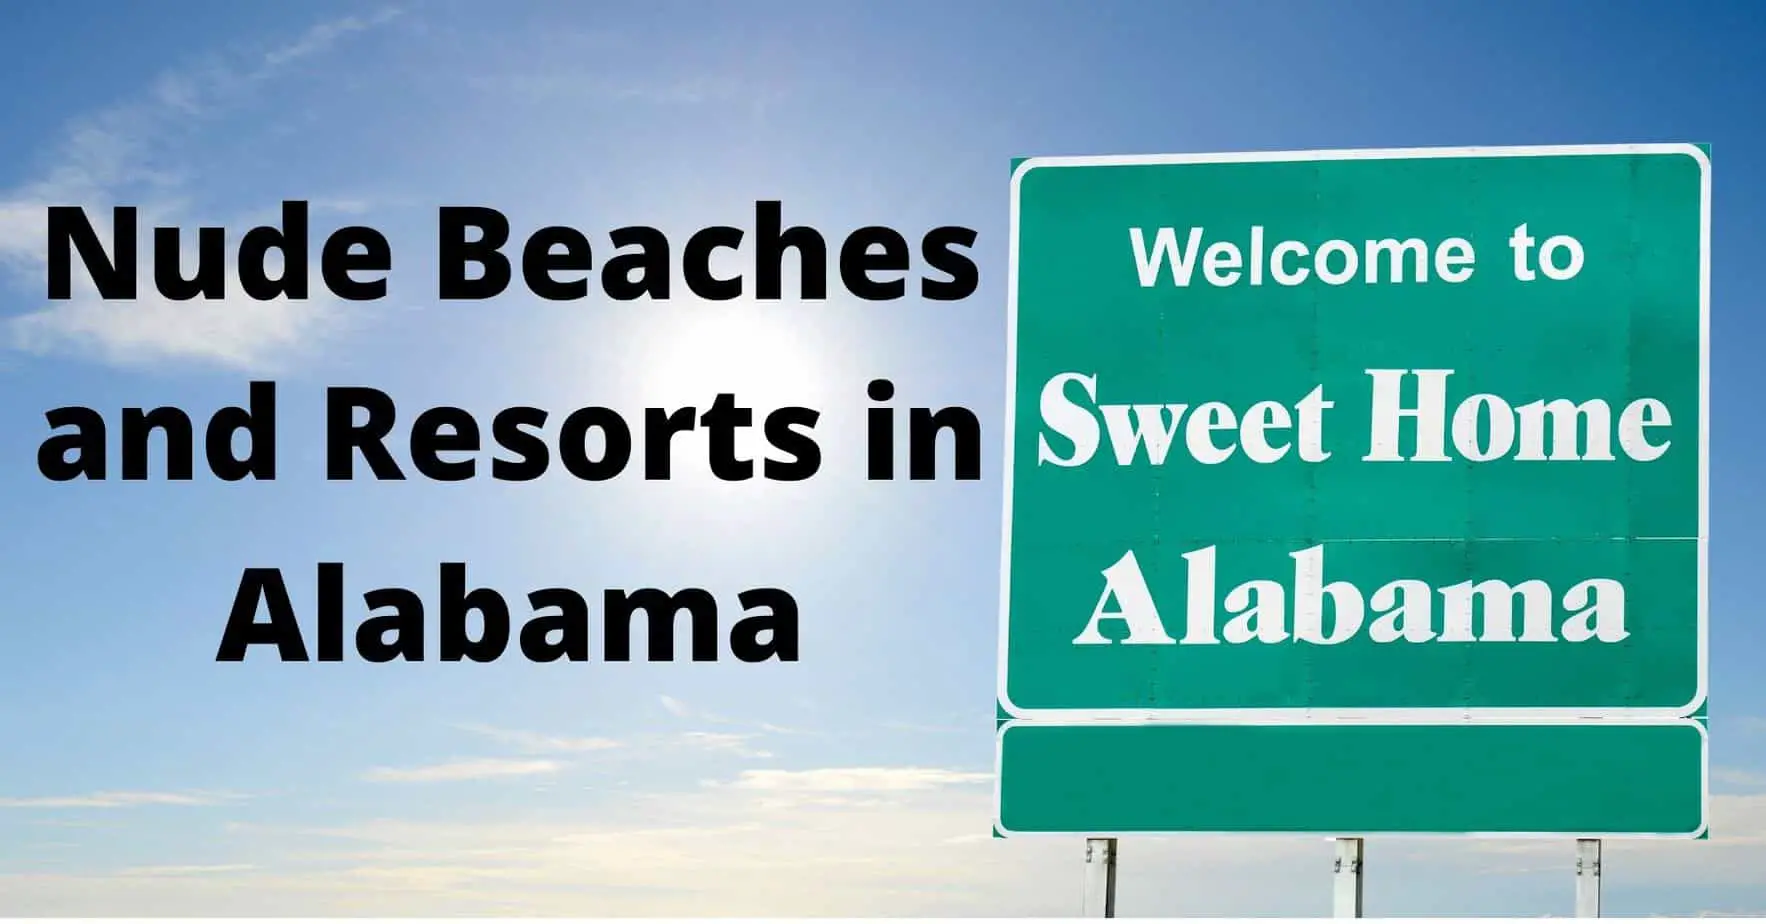 Nude Beaches and Resorts in Alabama